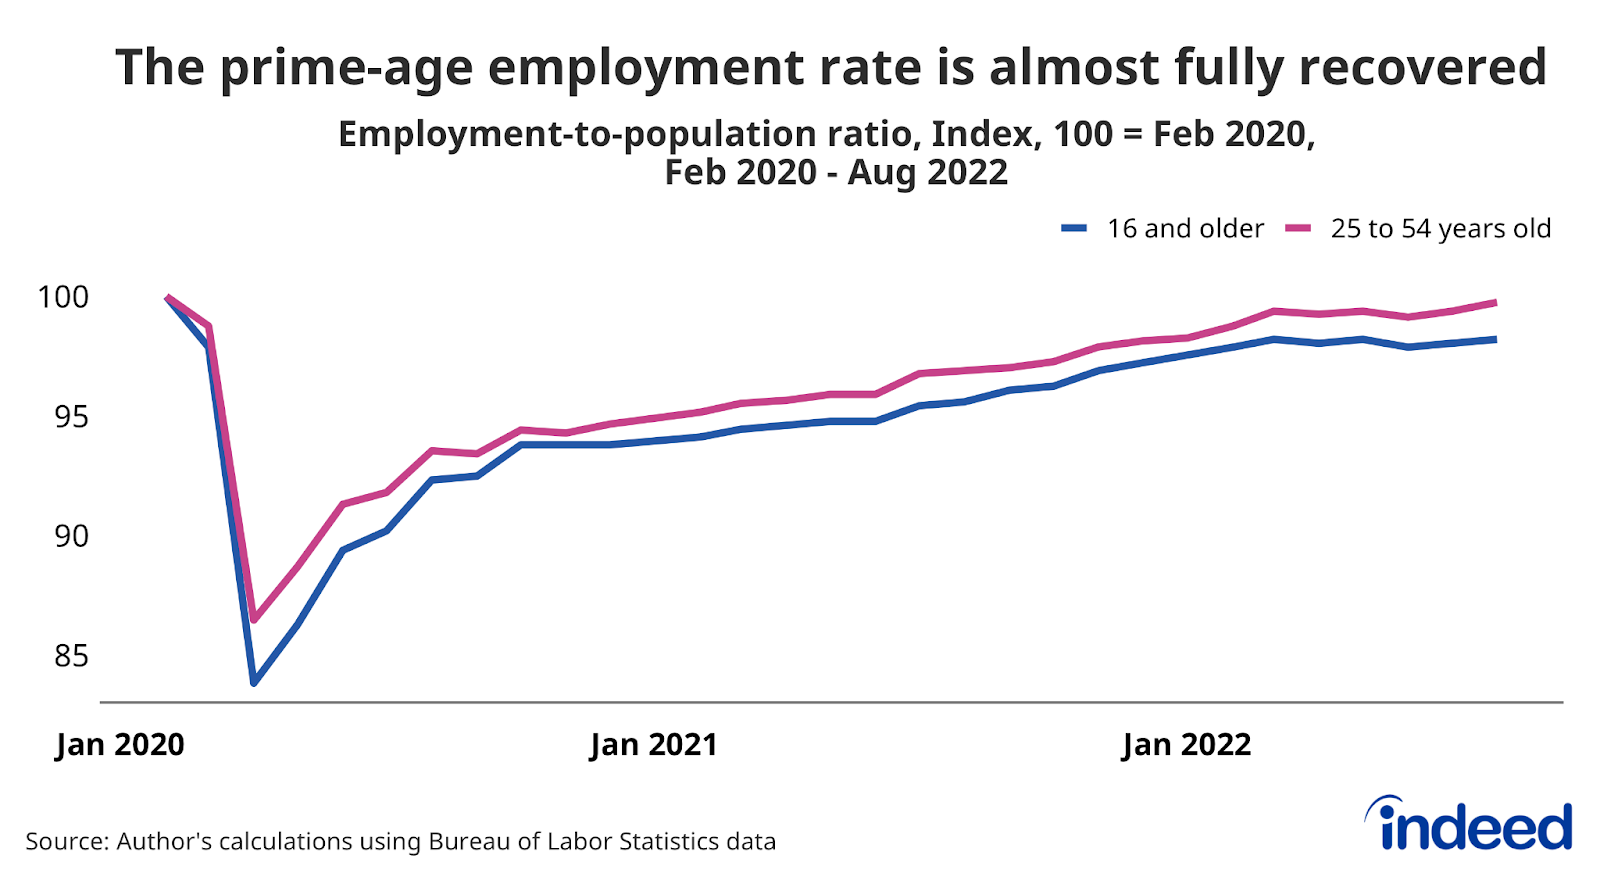 Line graph titled “The prime-age employment rate is almost fully recovered” with a vertical axis ranging from 85 to 100, tracking the indexed level of the employment-to-population ratio for all workers older than 16 and those ages 25 to 54.